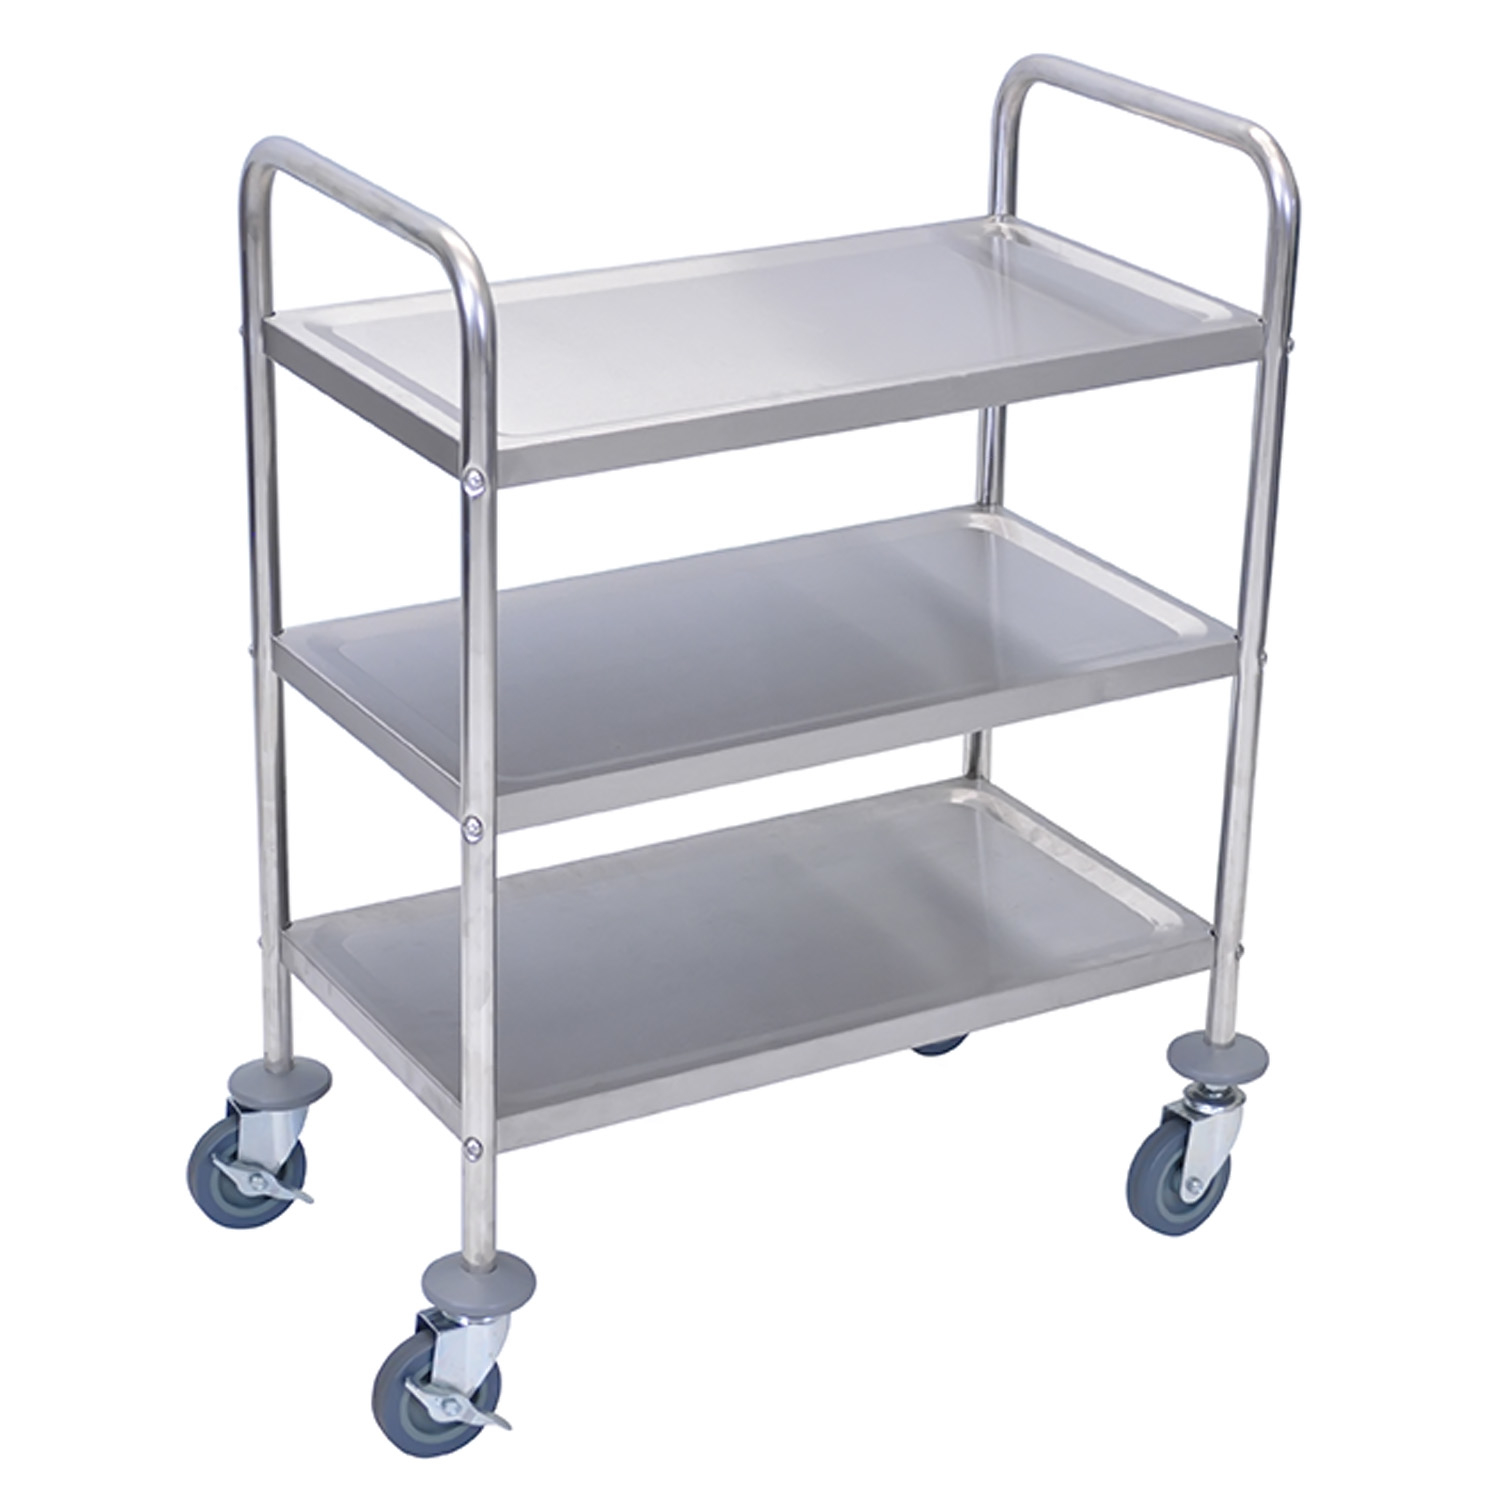 Offex Of-l100s3 - Stainless Steel Cart 37 Inches Height - Three Shelves